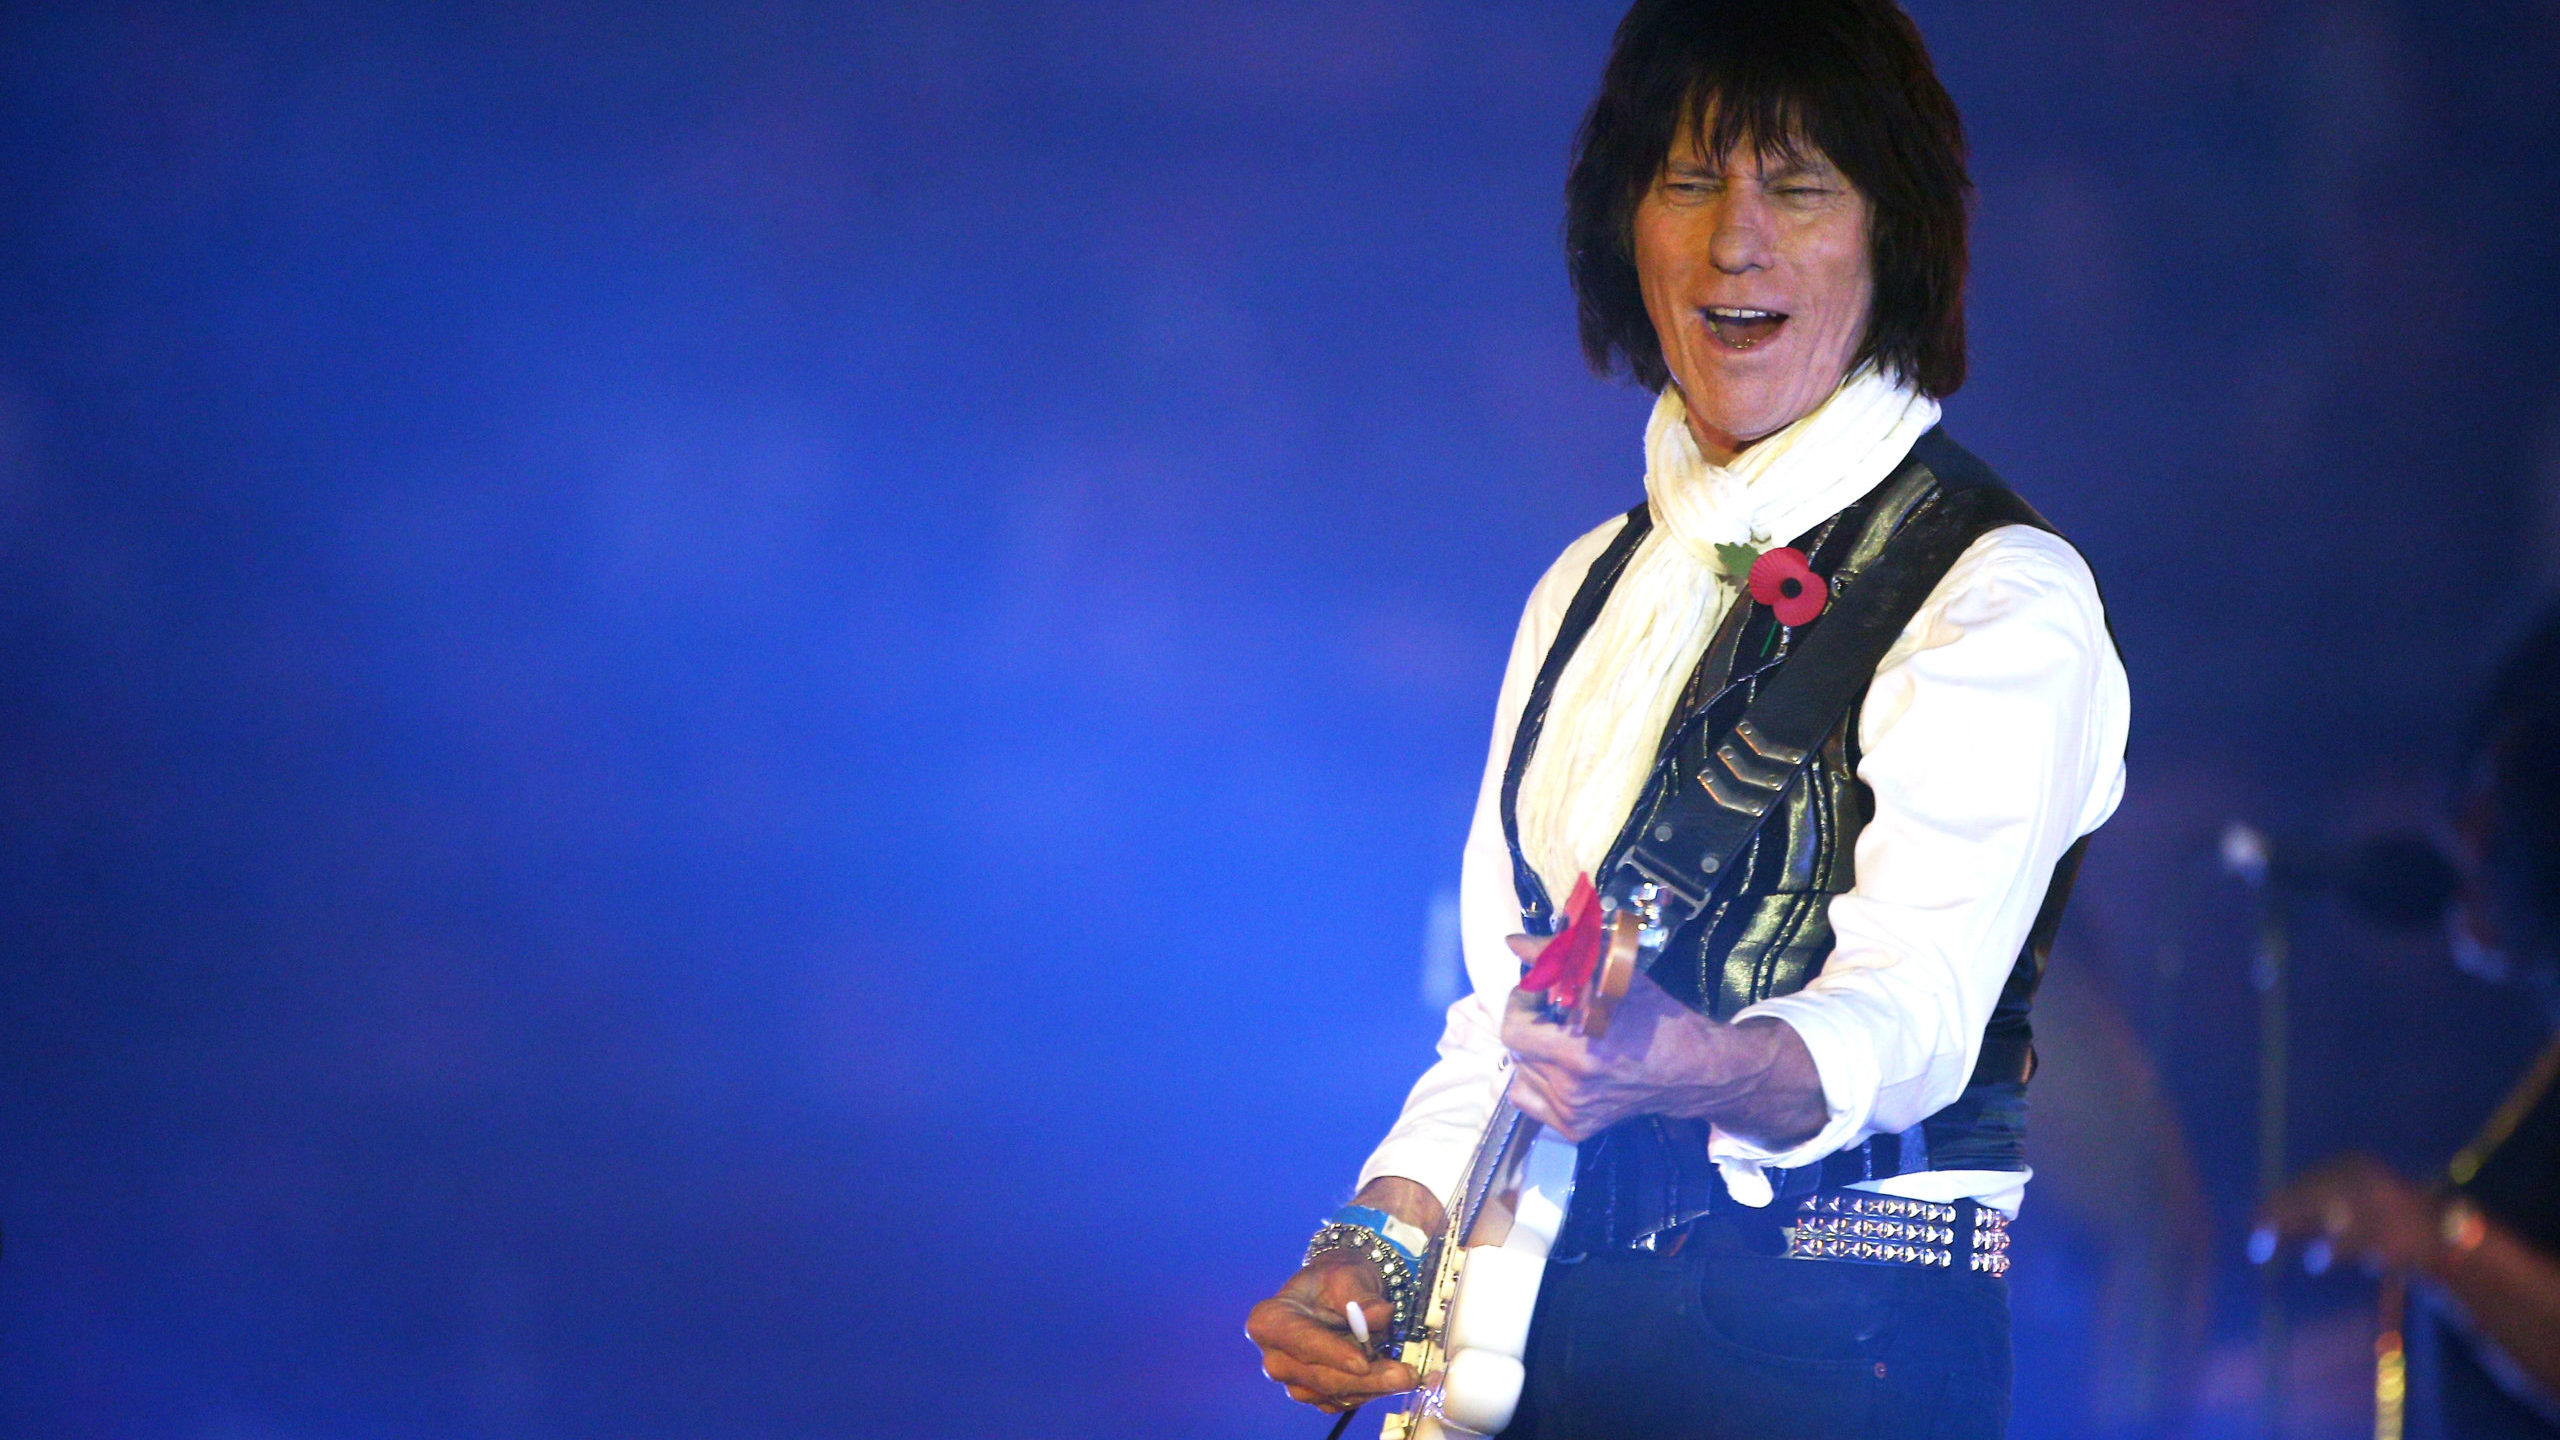 Jeff Beck, a guitar virtuoso who pushed the boundaries of blues, jazz and rock 'n' roll, influencin...